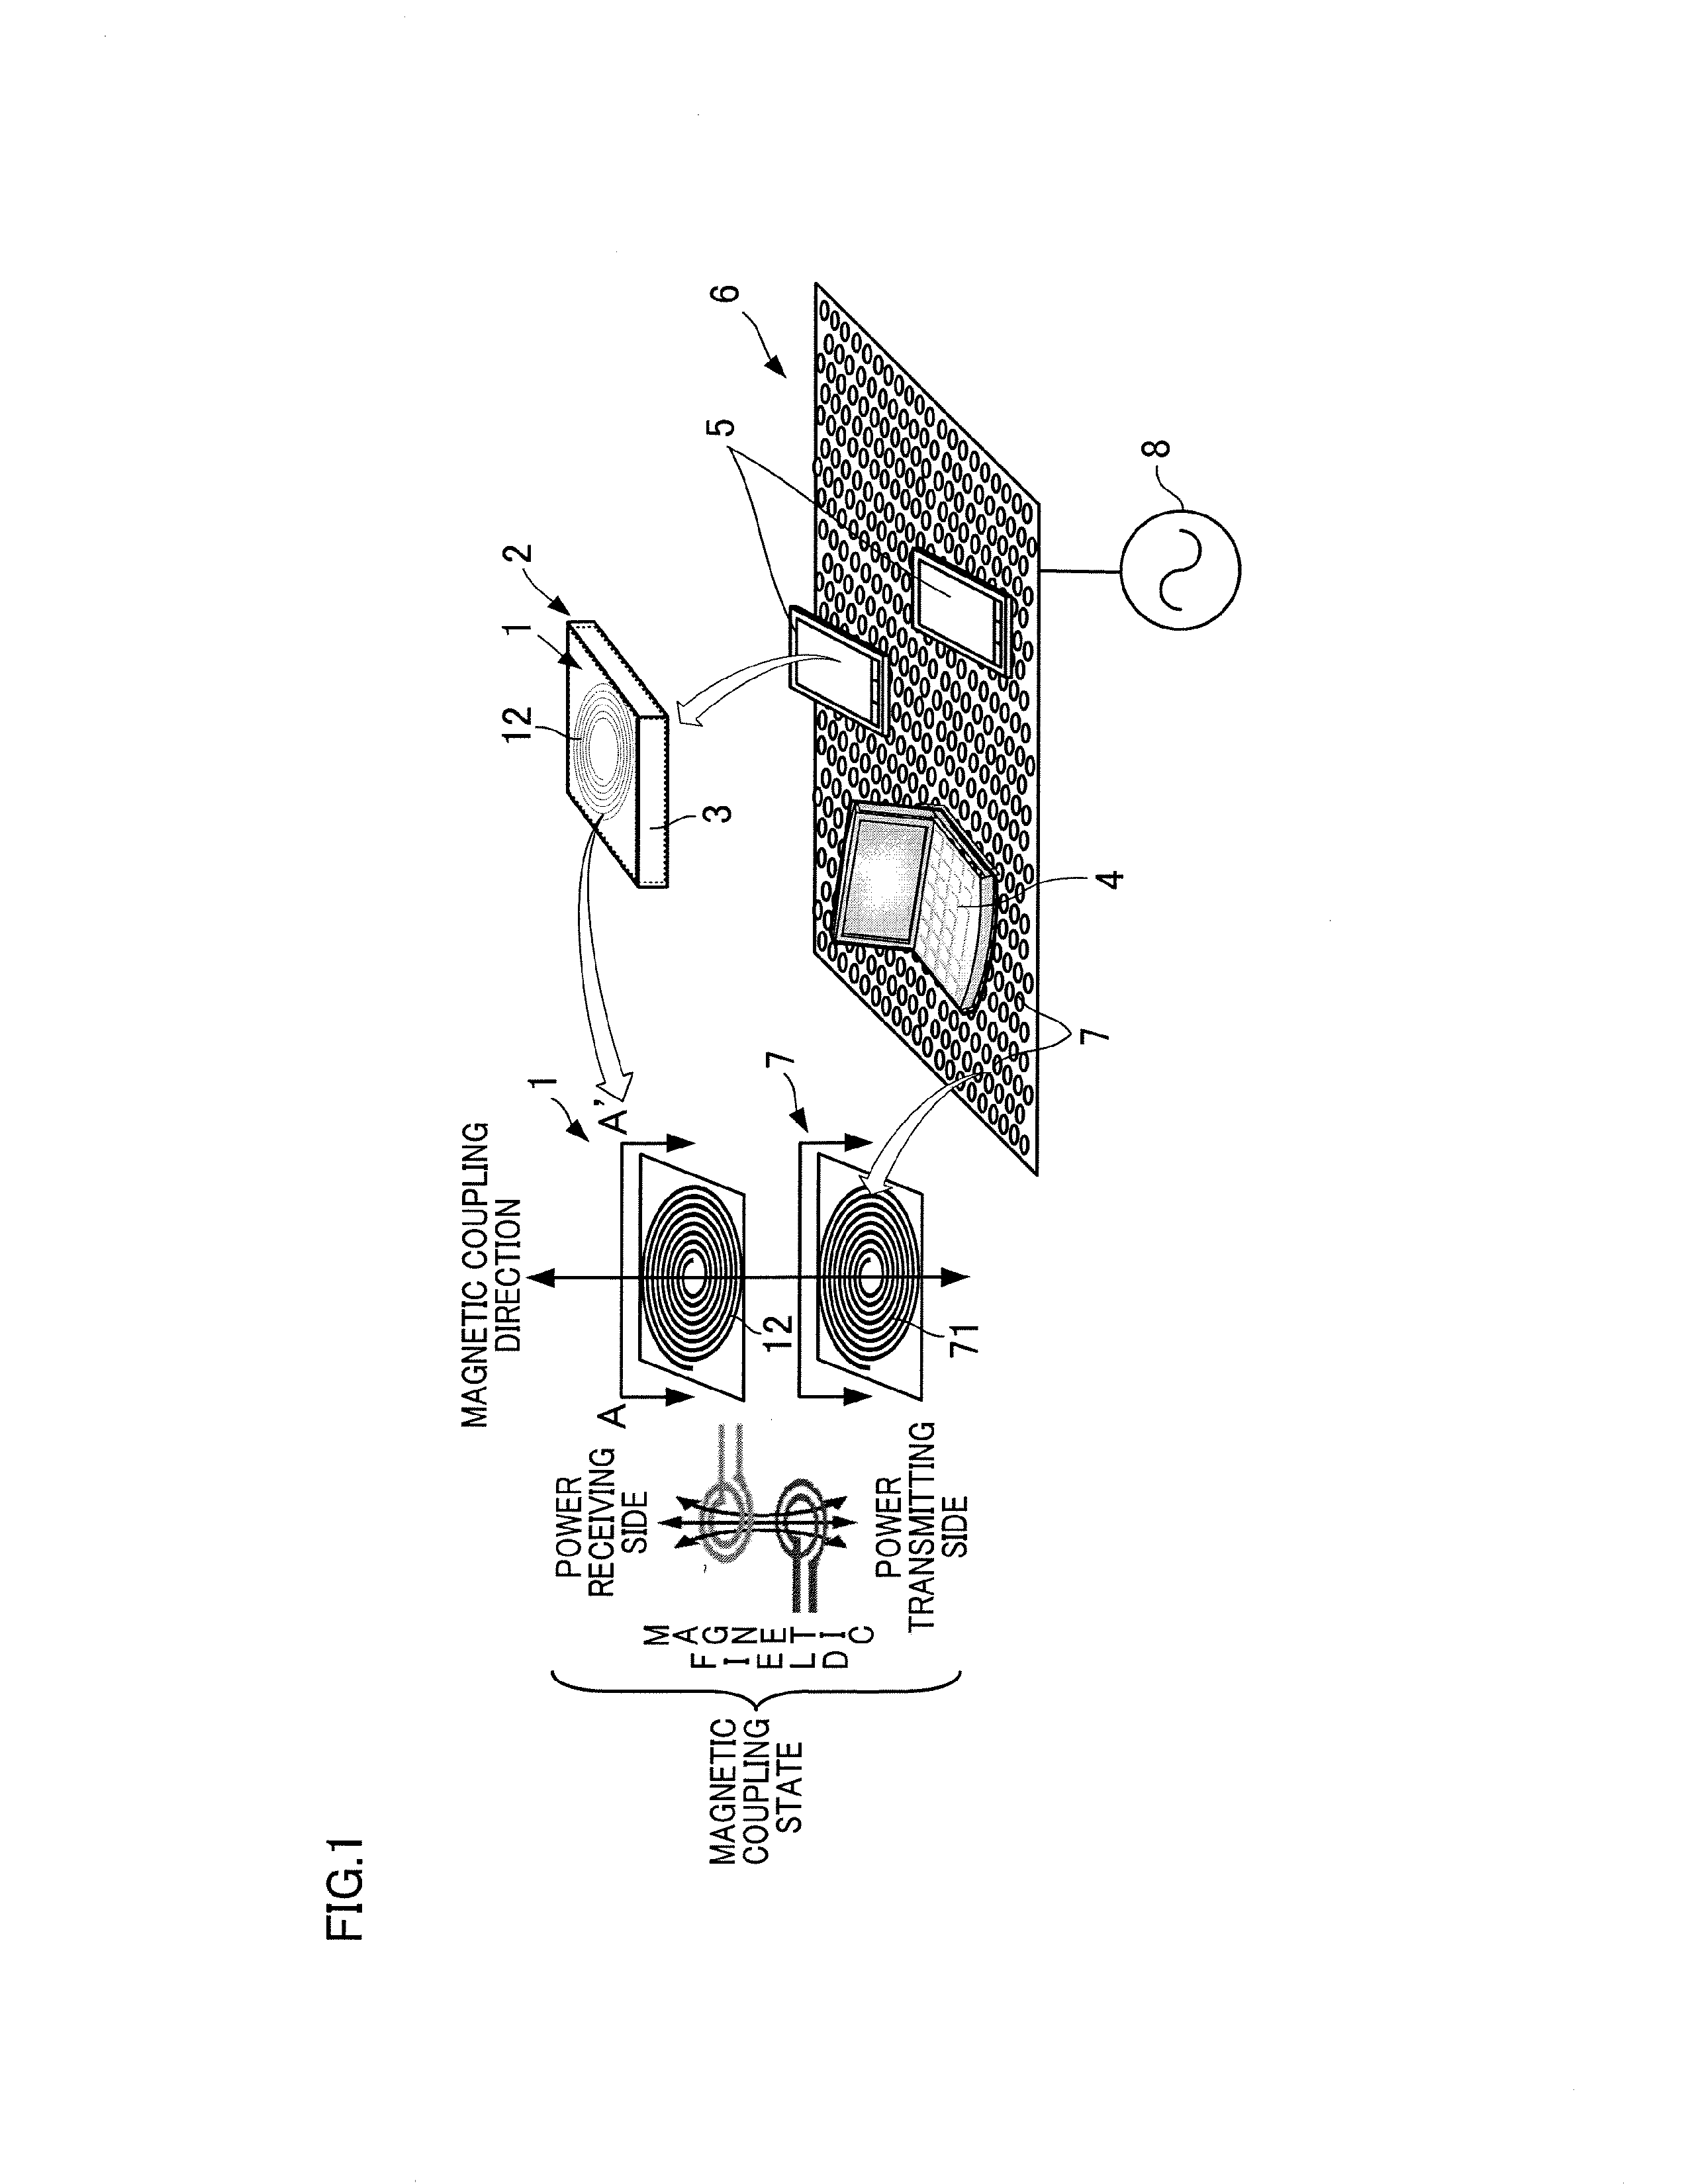 Mobile terminal power receiving module utilizing wireless power transmission and mobile terminal rechargable battery including mobile terminal power receiving module